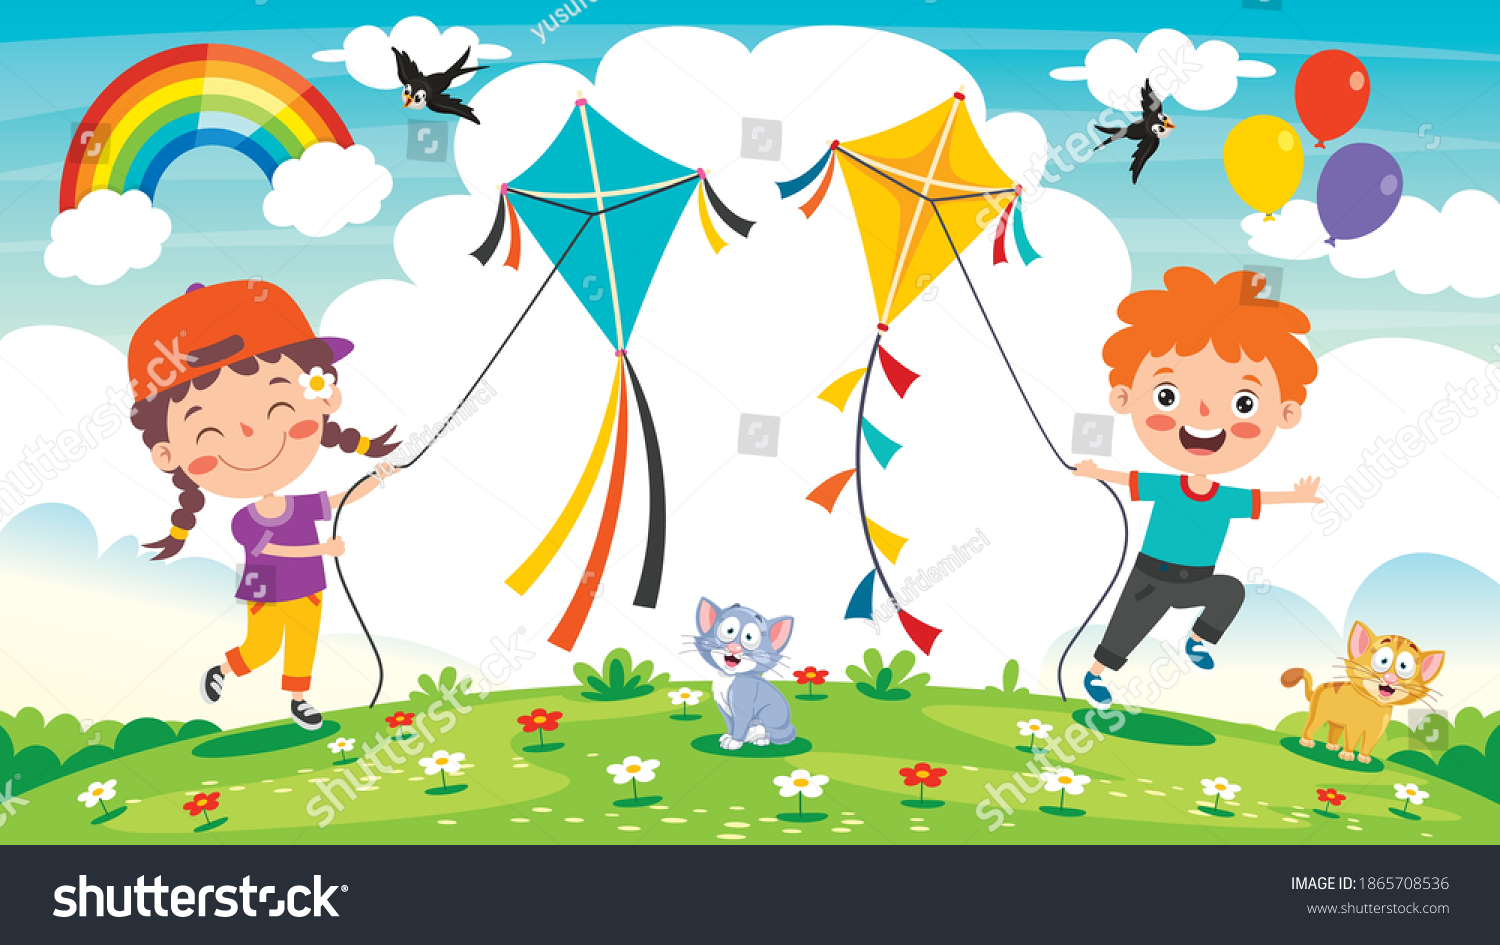 SVG of Kid Playing With A Colorful Kite svg